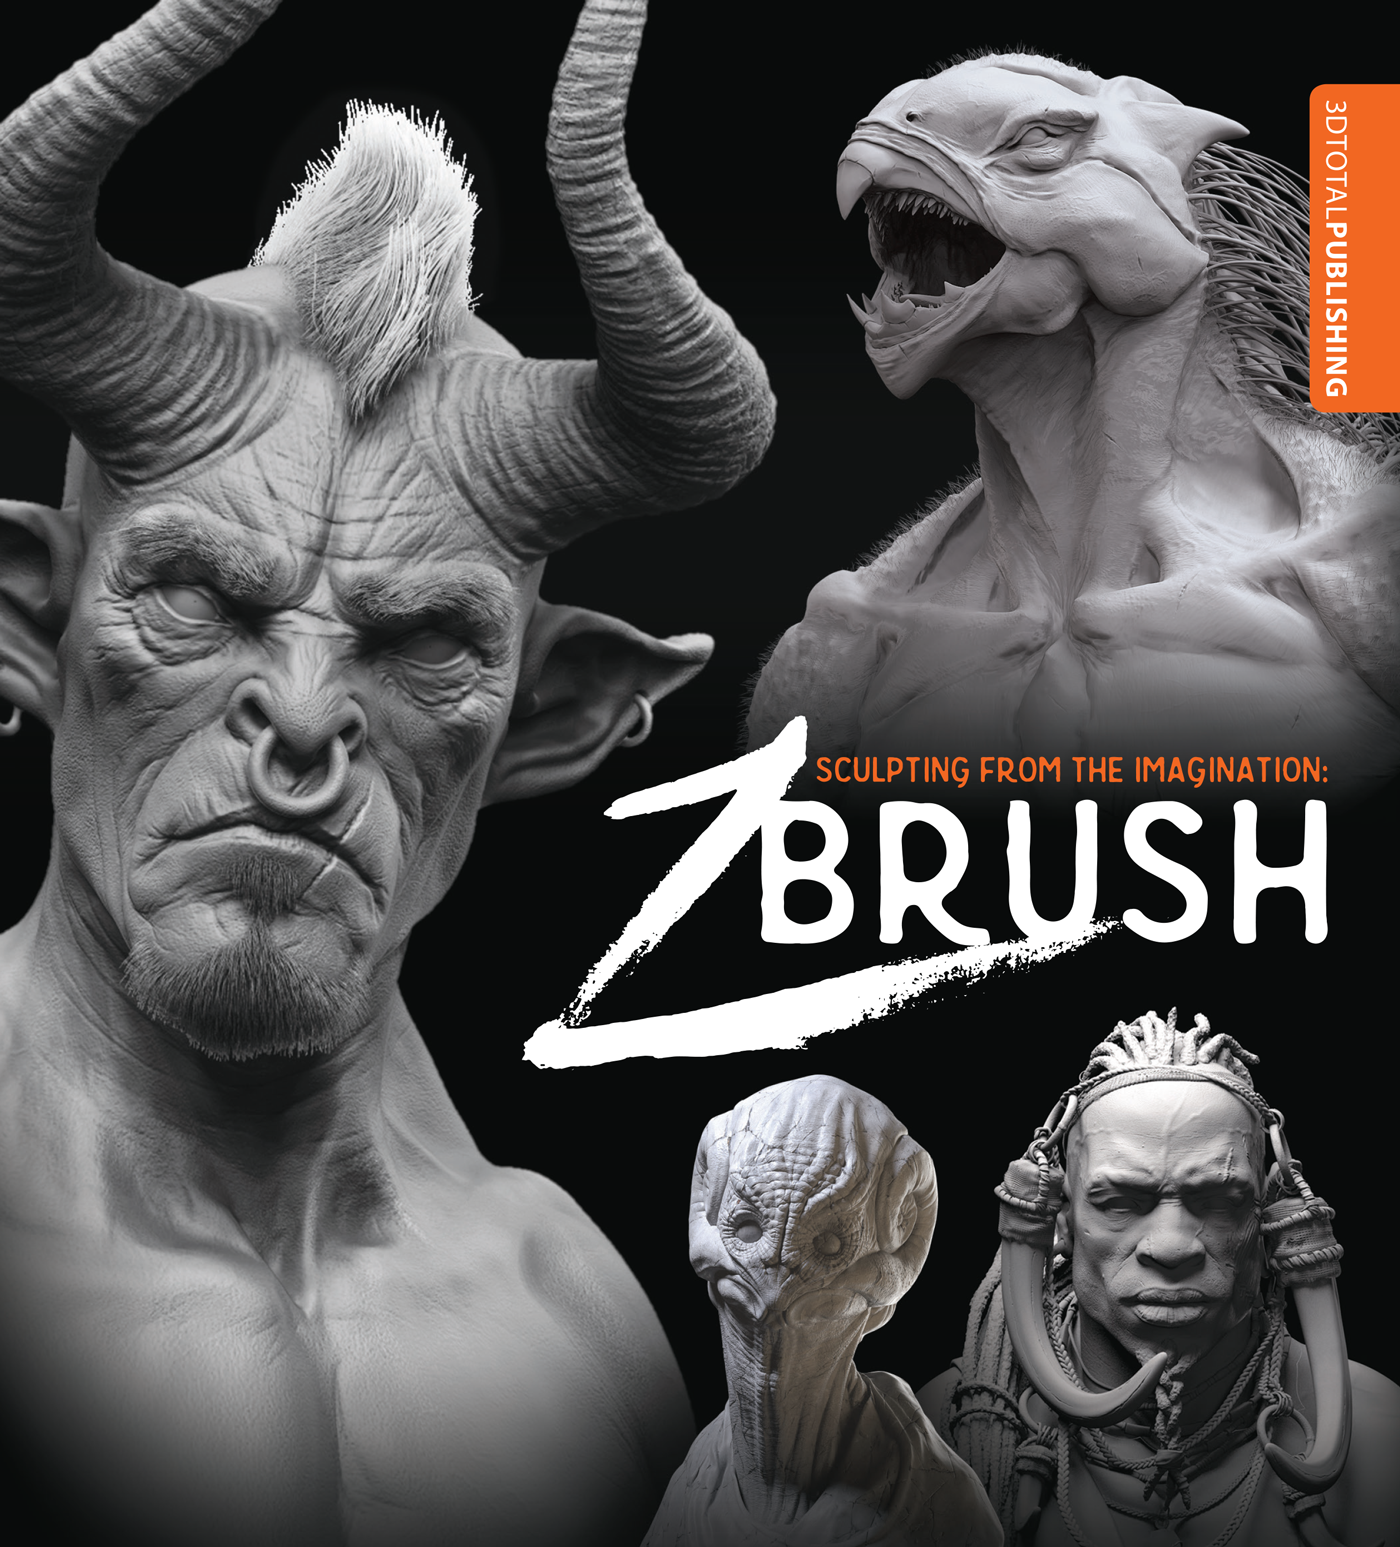 Cover of 'Sculpting From The Imagination: ZBrush' book, depicting grey 3d models of fantasy characters on a black background.